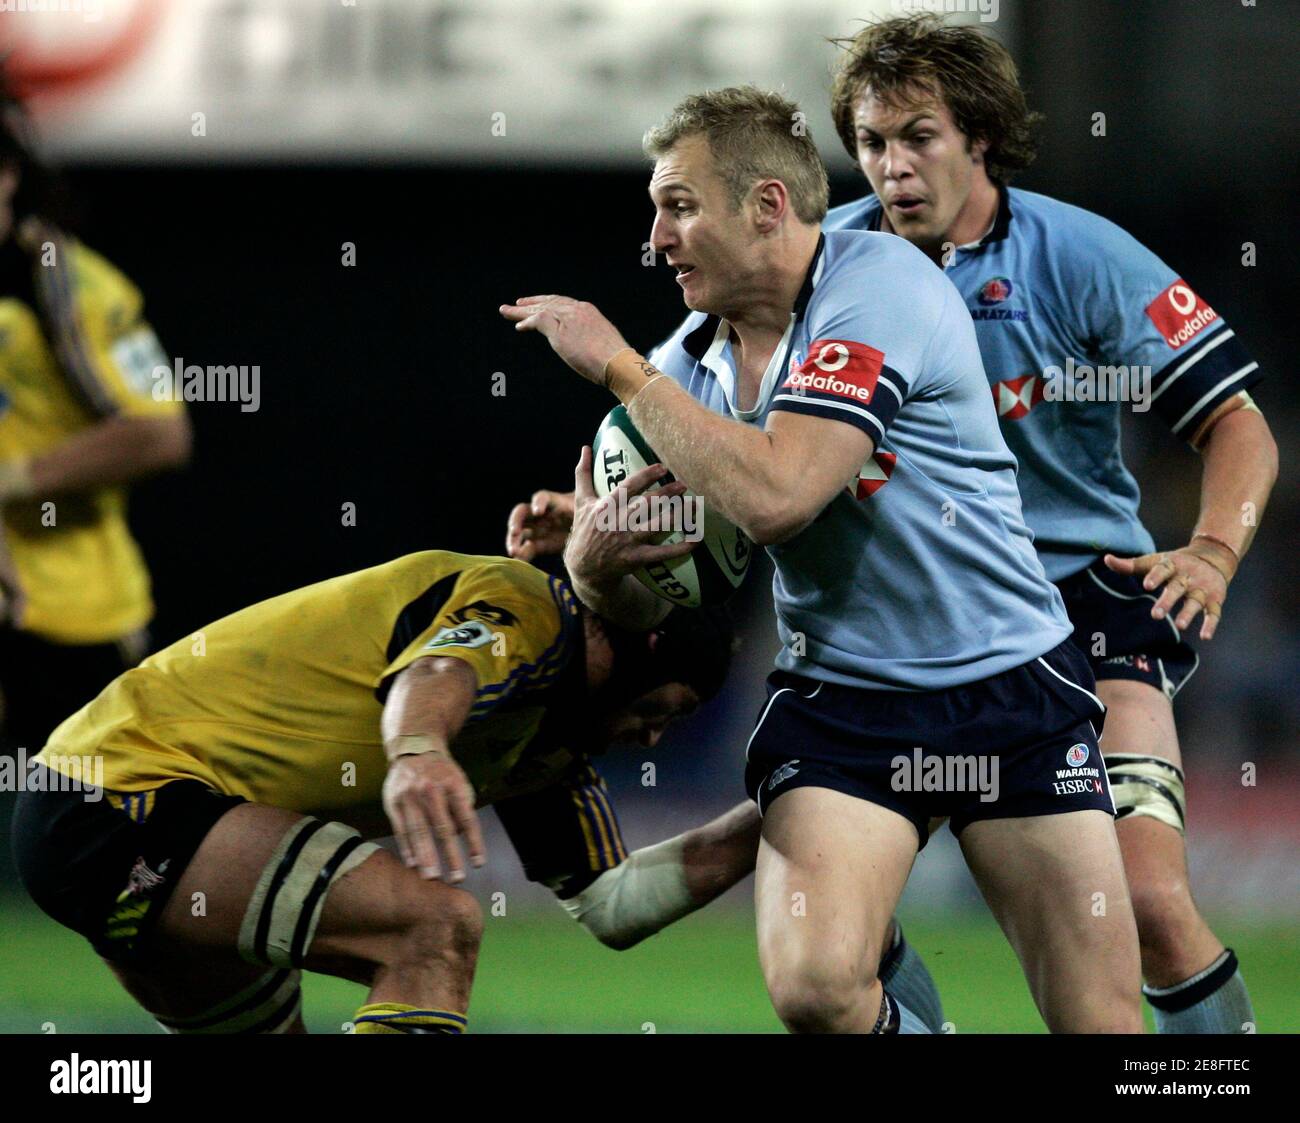 Peter Hewat (C) of the Waratahs from New South Wales is tackled by Luke Andrews (L) of the Hurricanes from New Zealand as team mate Stephen Hoiles (R) backs up during their Super 14 ruby match in Sydney May 13, 2006. The Hurricanes won 19-14. REUTERS/Will Burgess Stock Photo